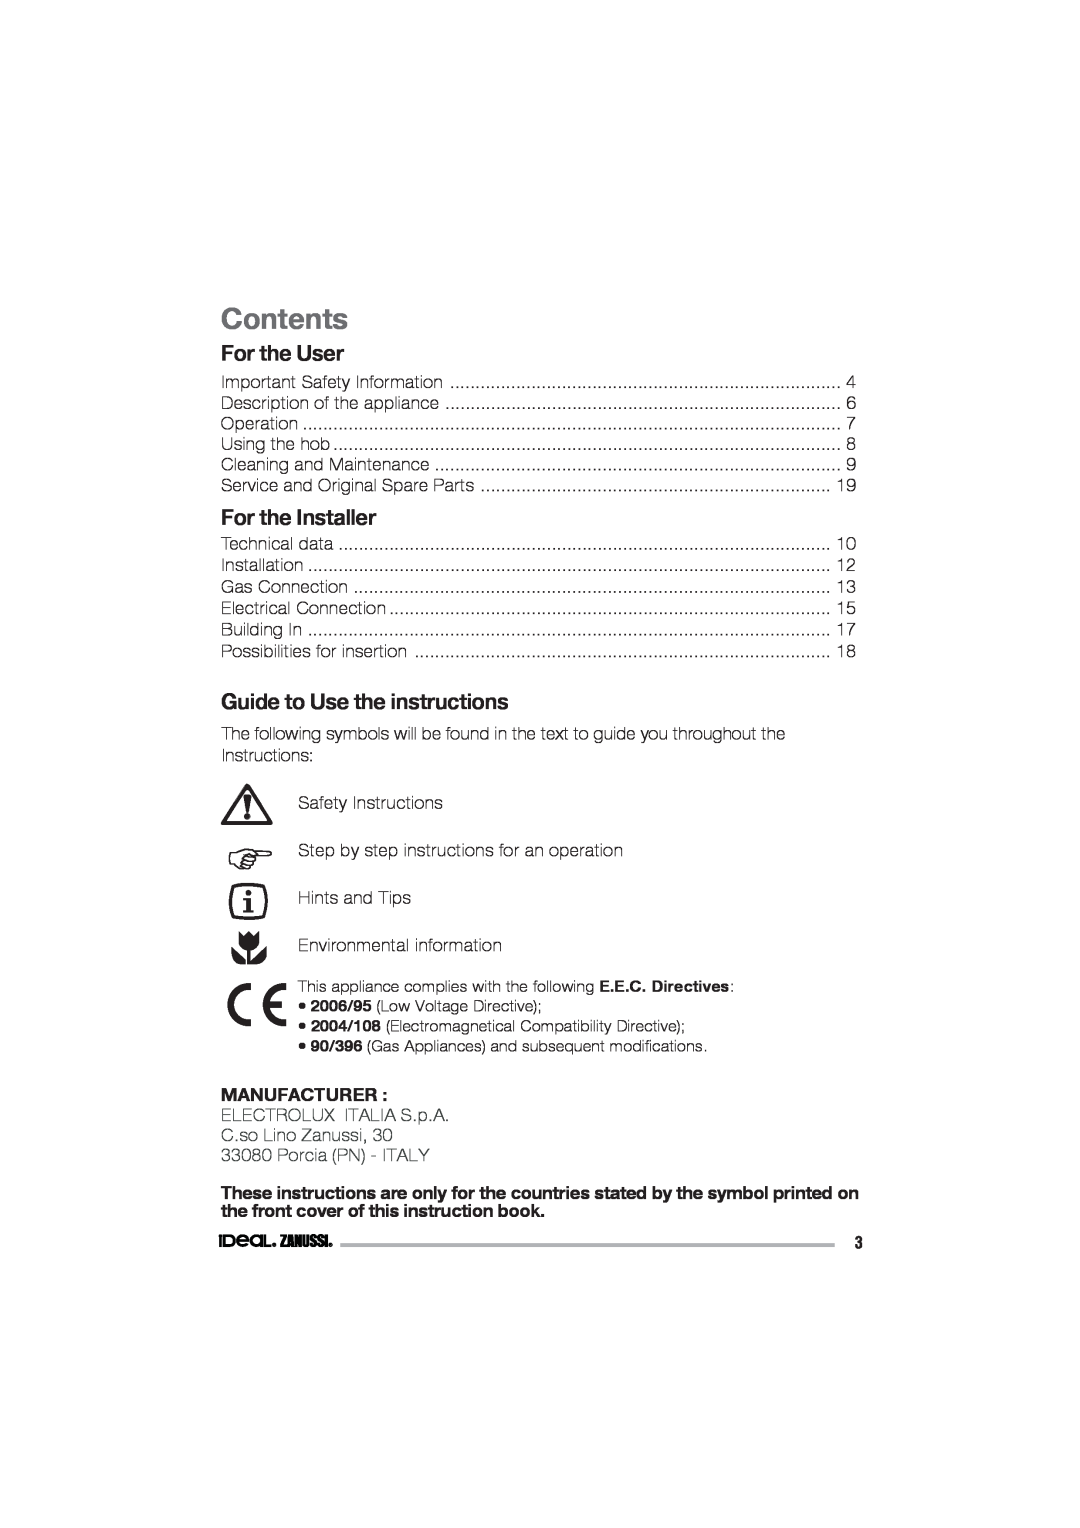 IDEAL INDUSTRIES IZGS 68 ICTX manual Contents, For the User, For the Installer, Guide to Use the instructions 